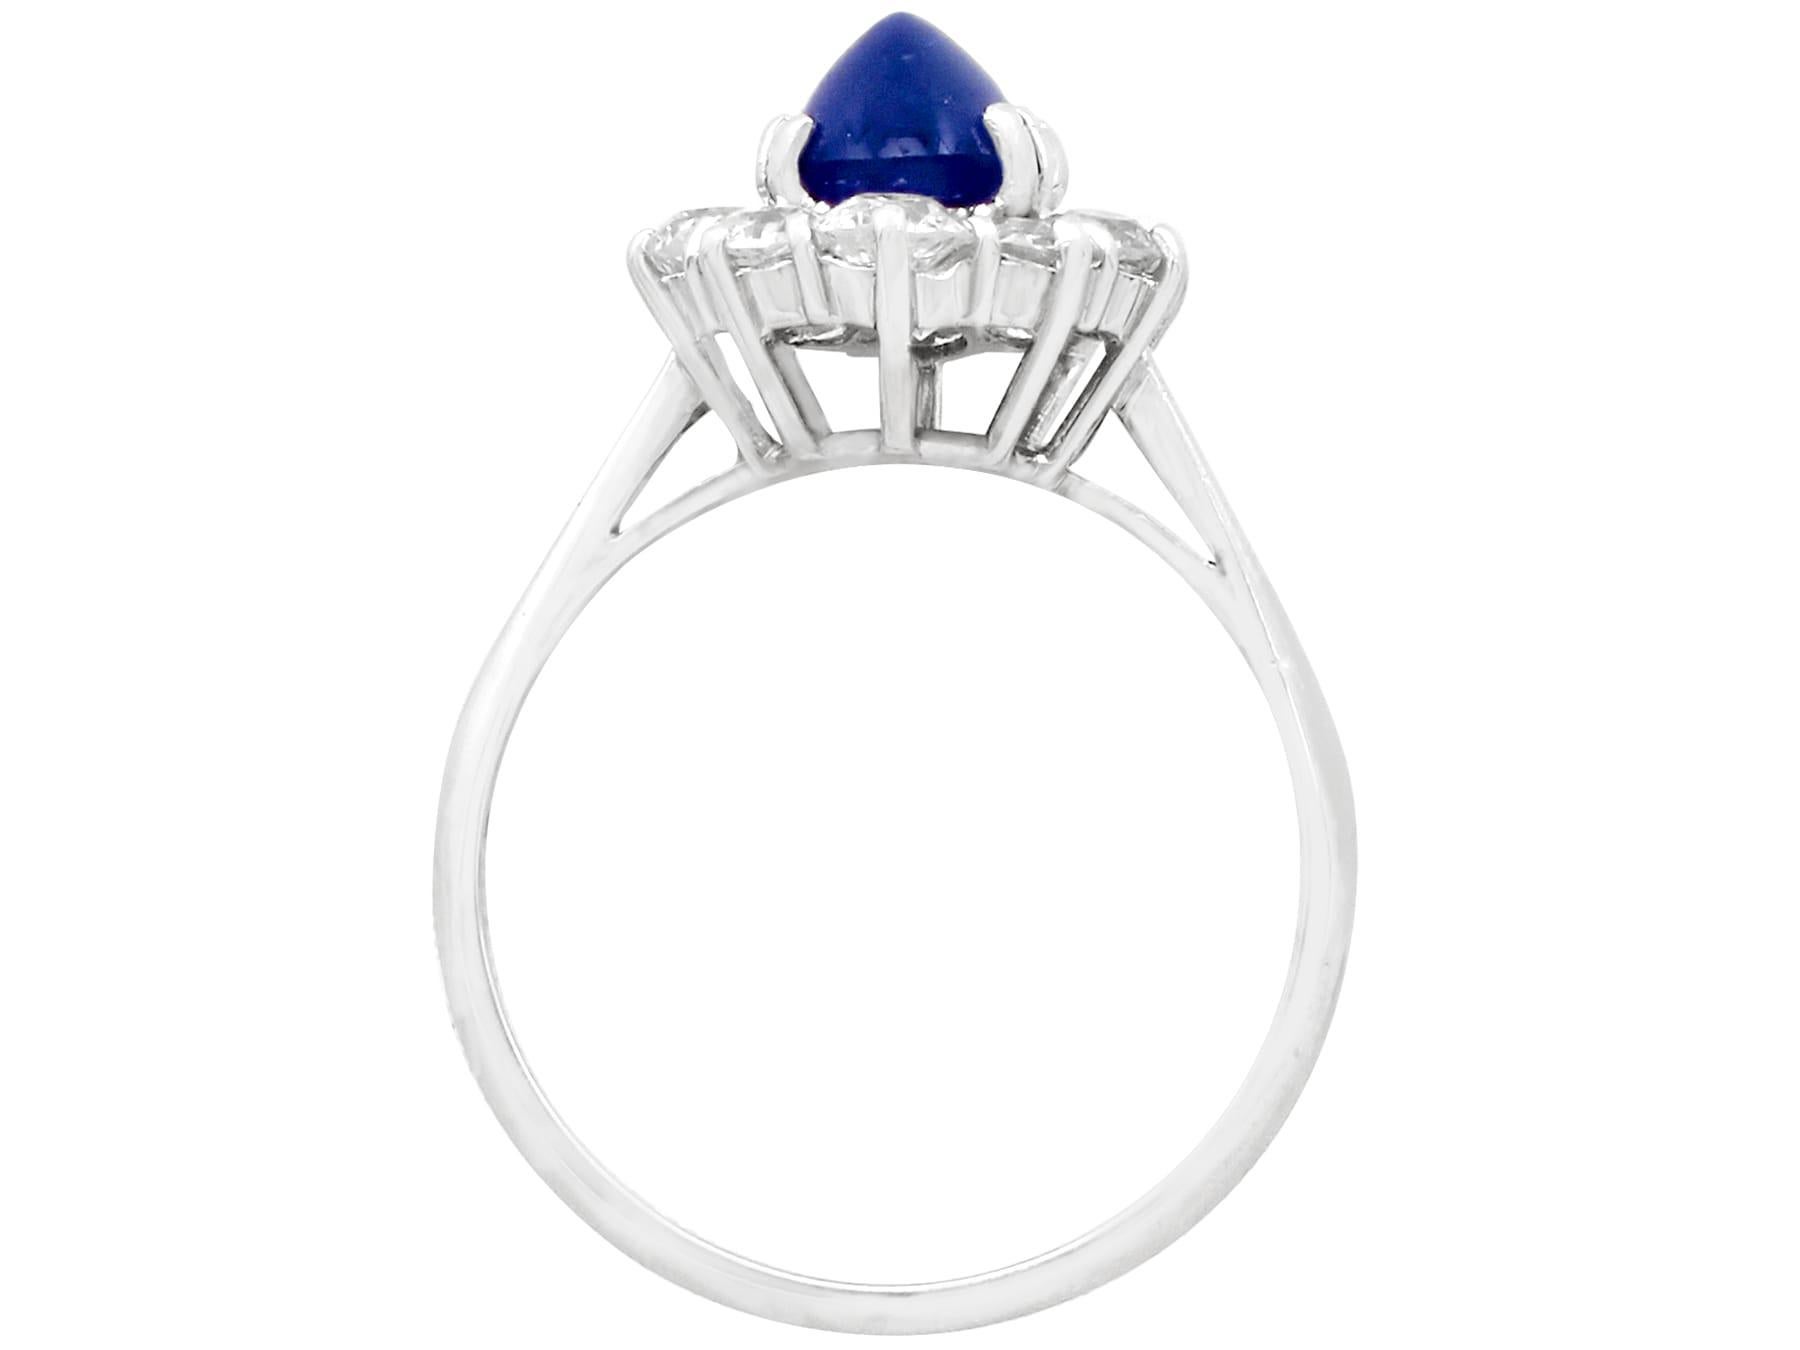 1940s 2.17 Carat Cabochon Cut Sapphire and Diamond Gold Cluster Ring In Excellent Condition For Sale In Jesmond, Newcastle Upon Tyne